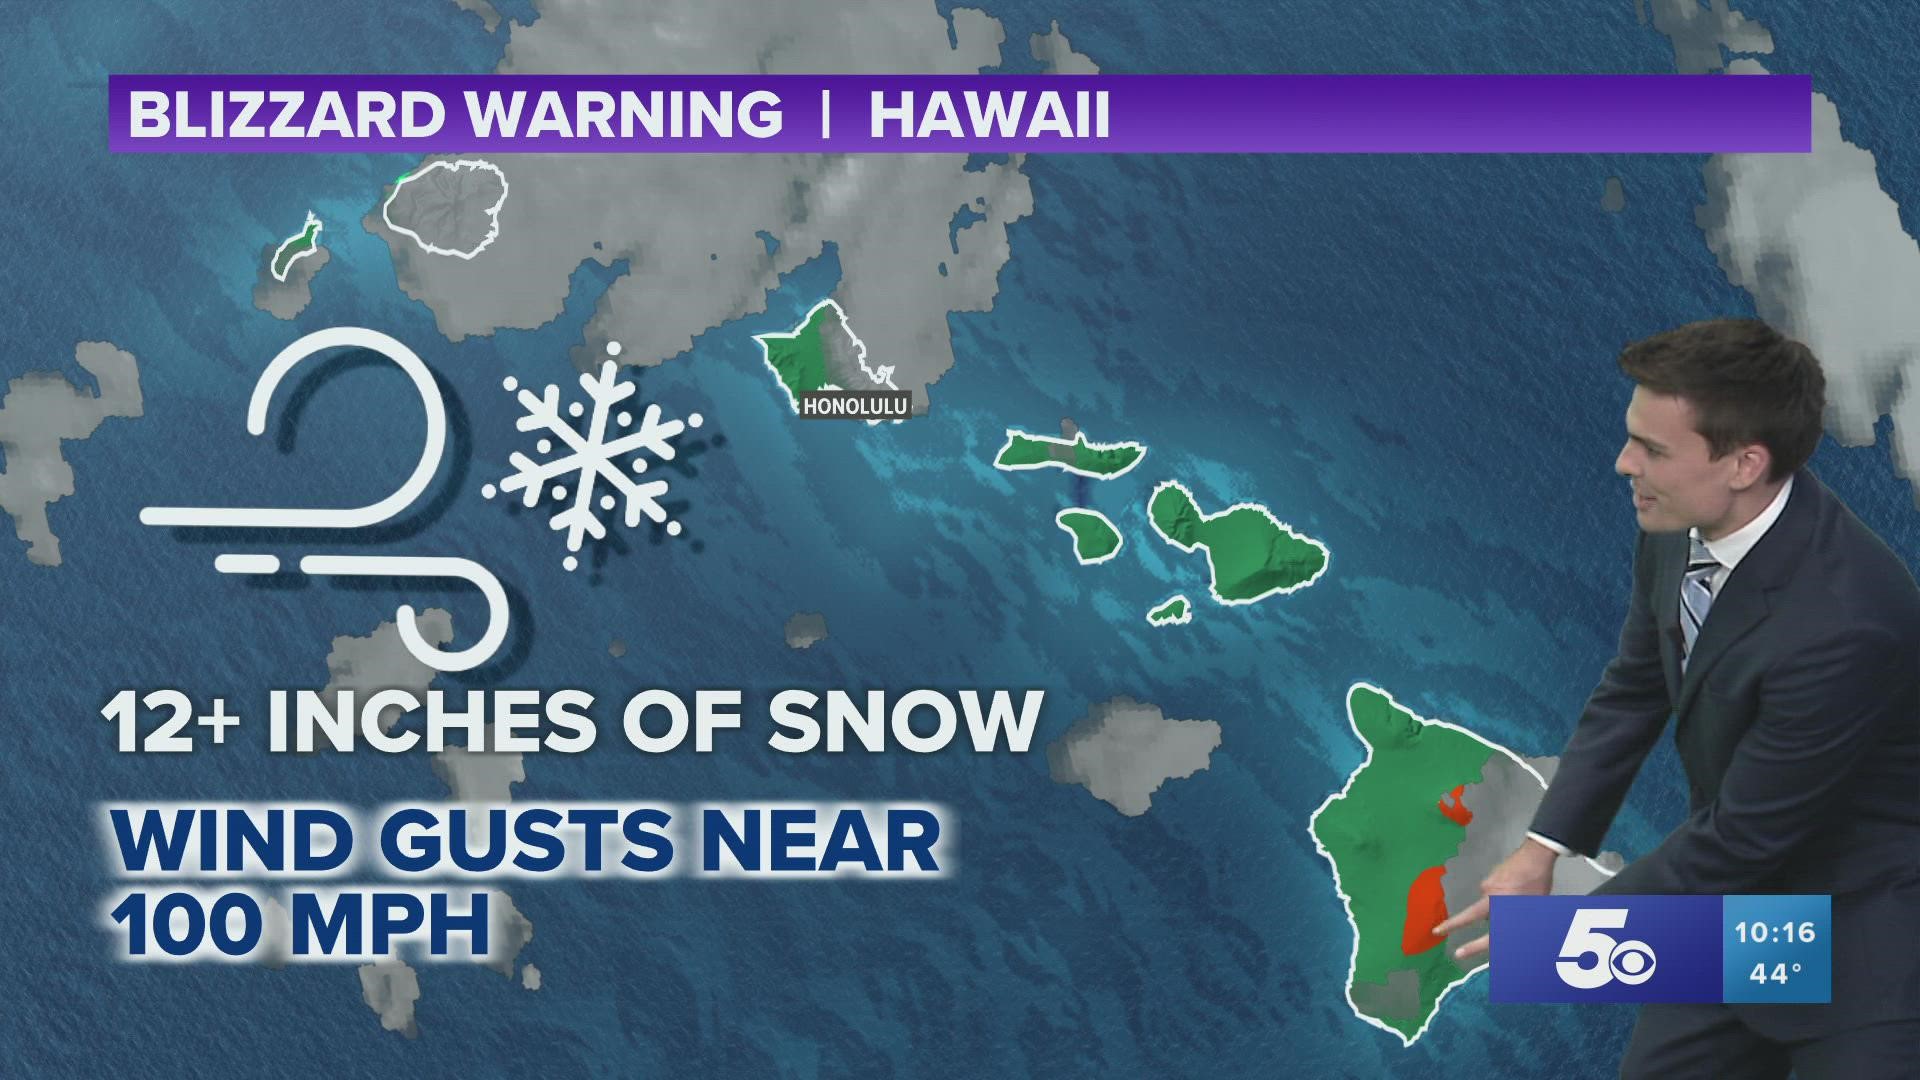 Over a foot of snow and 100+ MPH wind gusts are likely this weekend on the mountain summits of the Big Island of Hawaii. Heavy rain is expected for lower elevations.